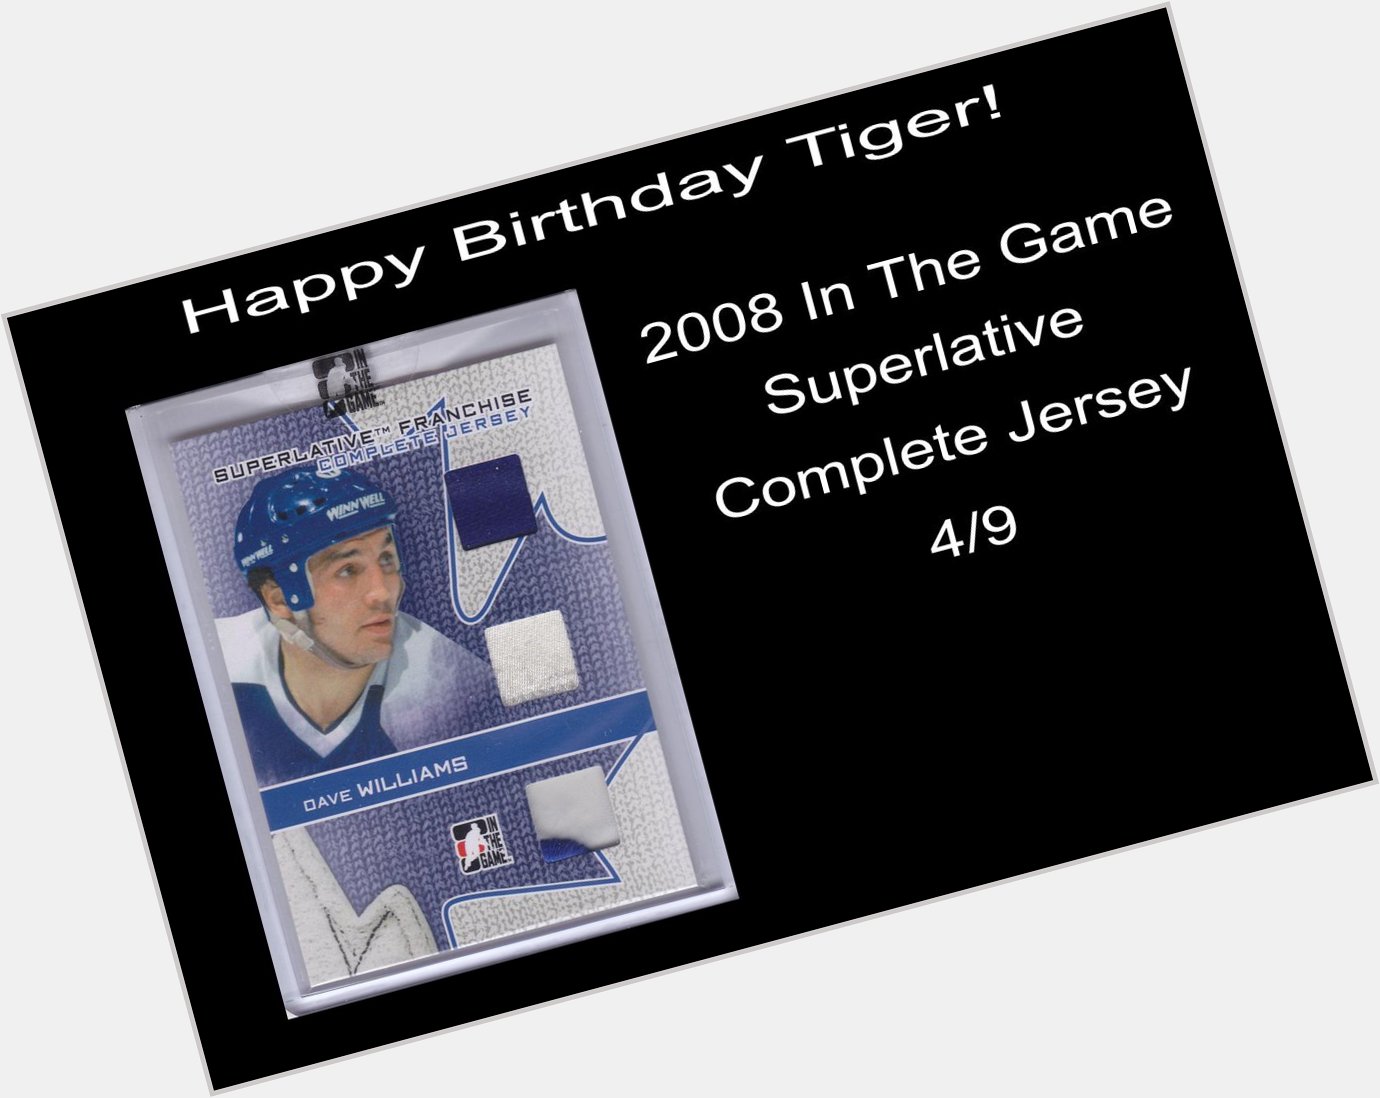 Happy BDay to Tiger Williams. Pictured is a relic card issued by In The Game in 2008 